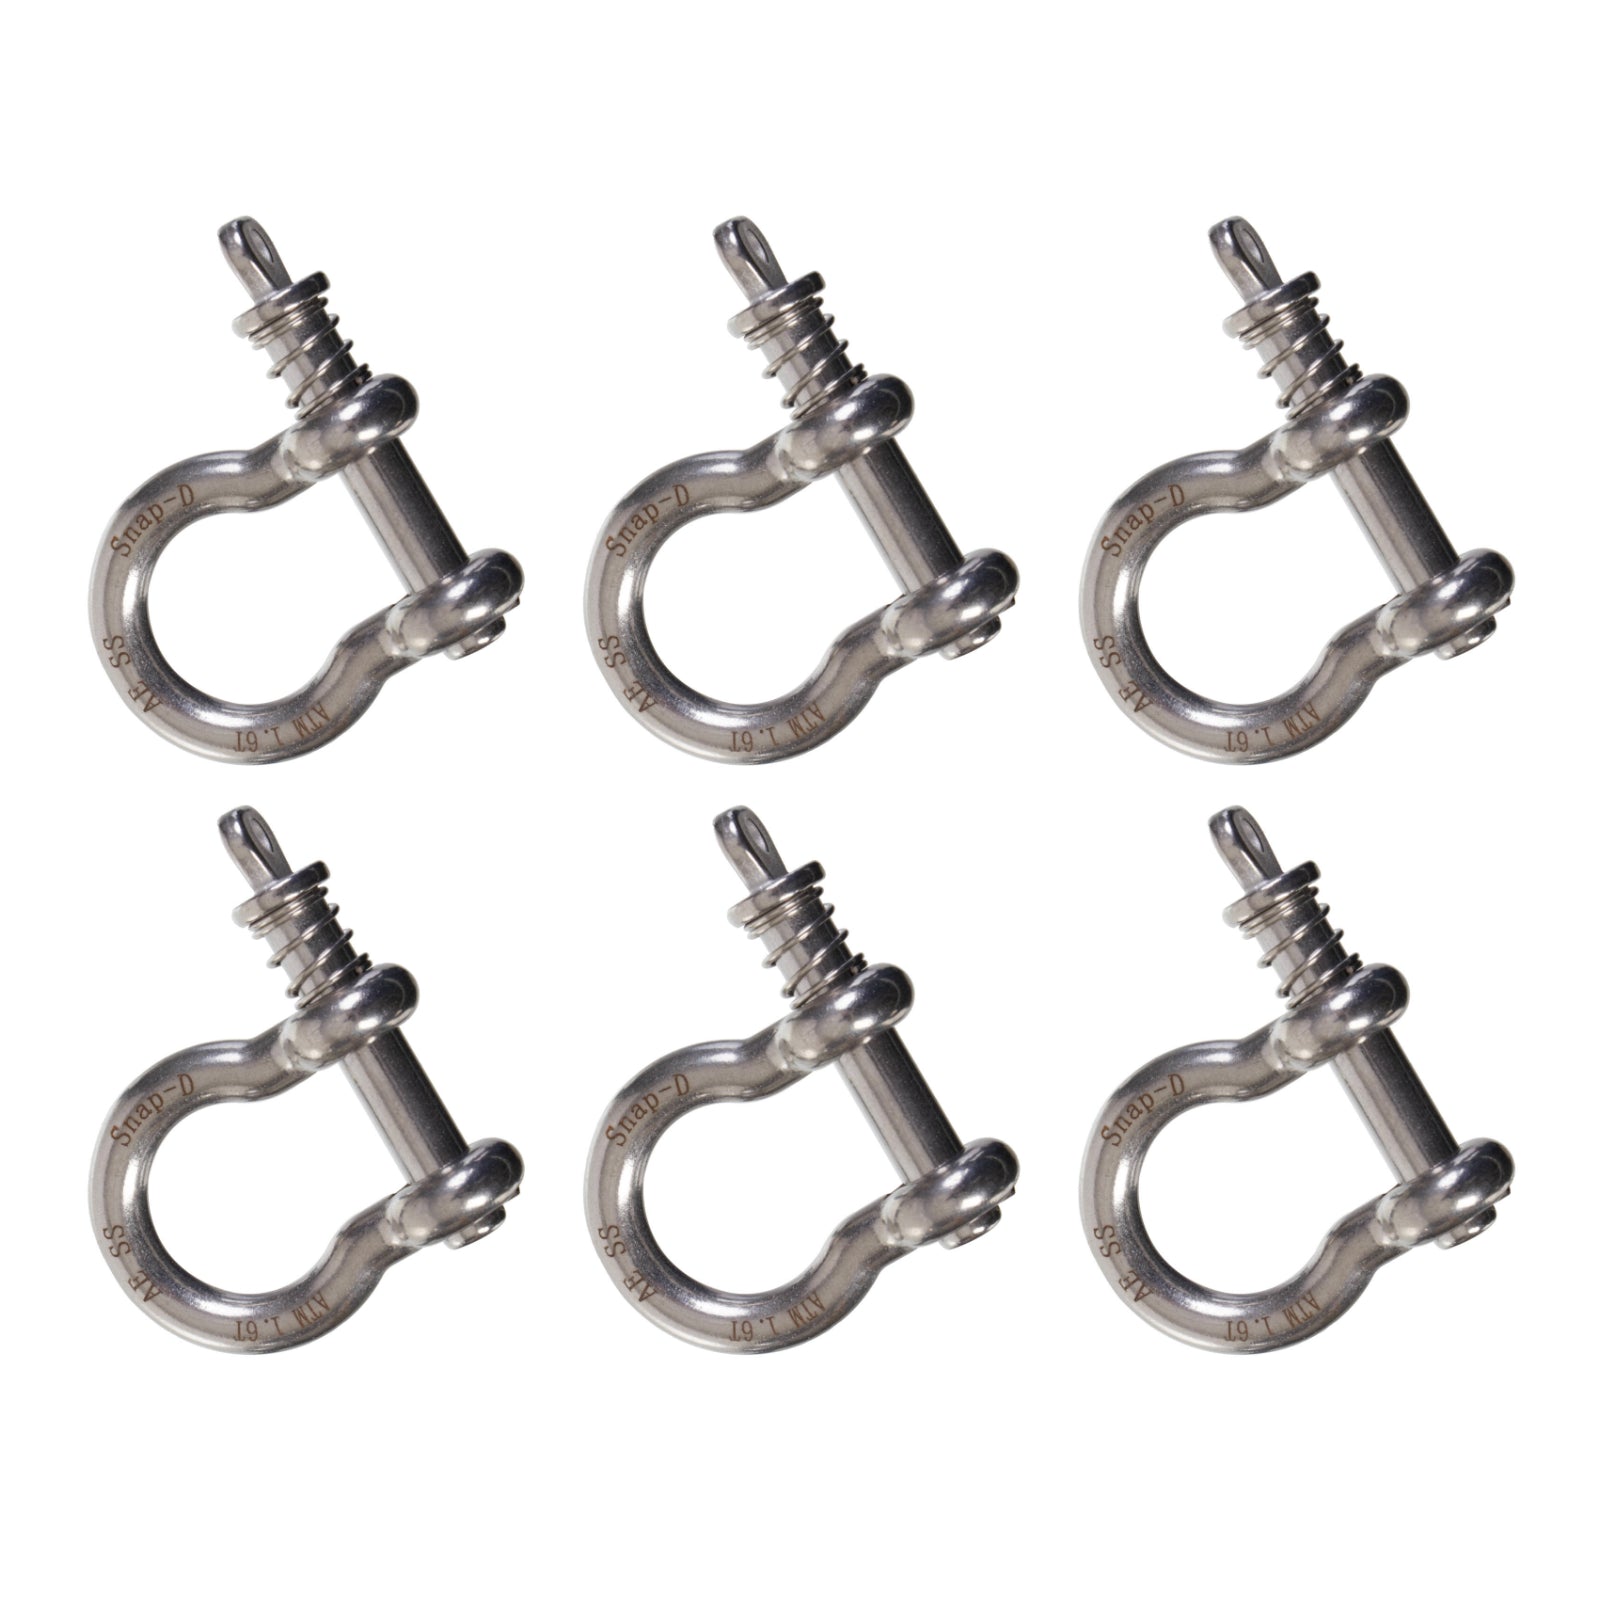 New SNAP-D 10mm Bow Shackle - 6 Pack Special #SD10BSS6PK